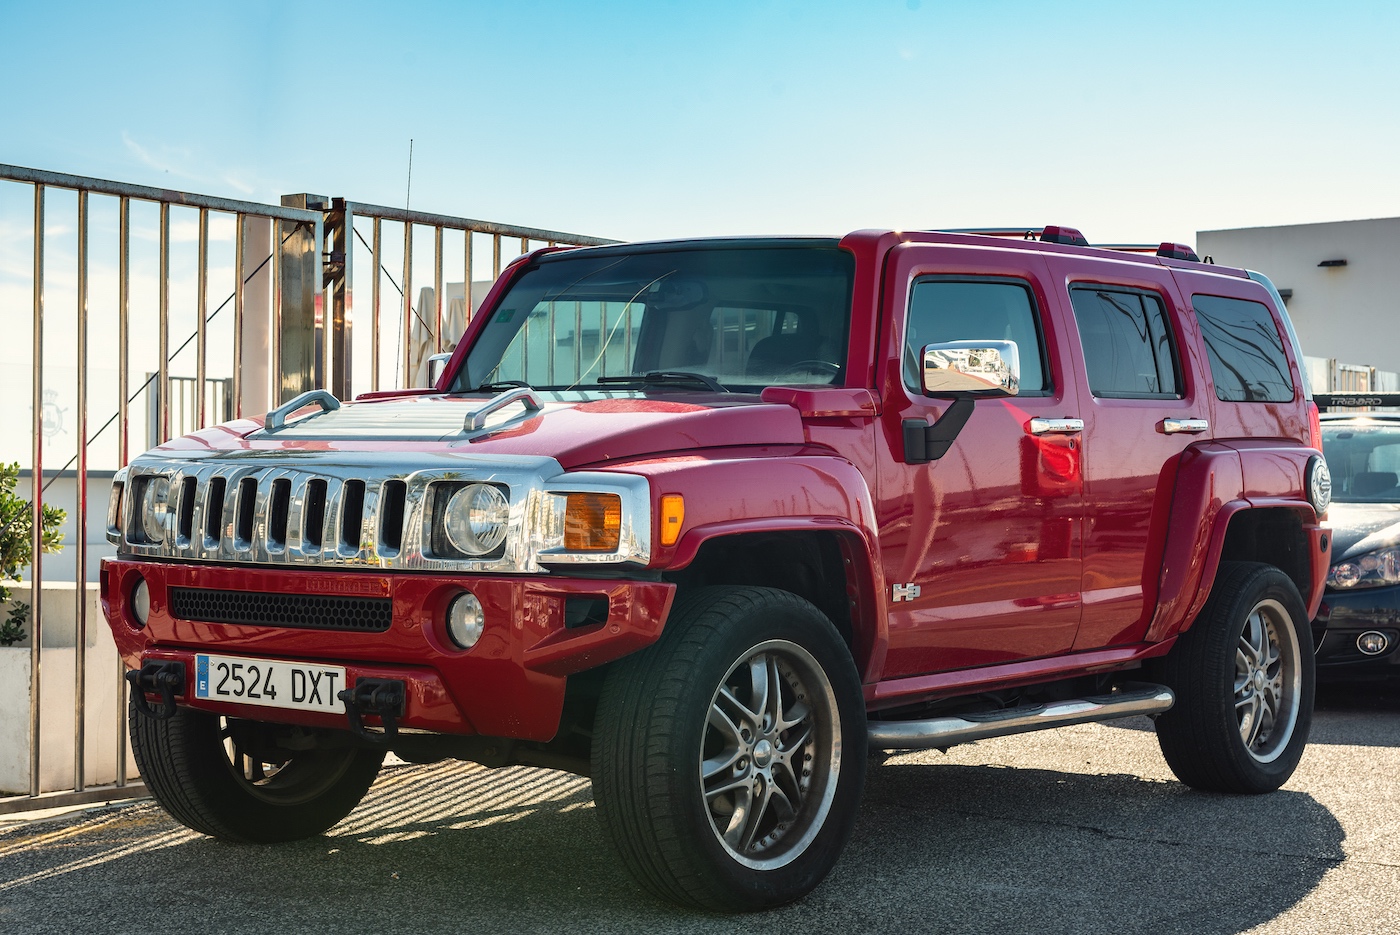 An all-electric version of the iconic Hummer may be coming soon – BGR1400 x 935